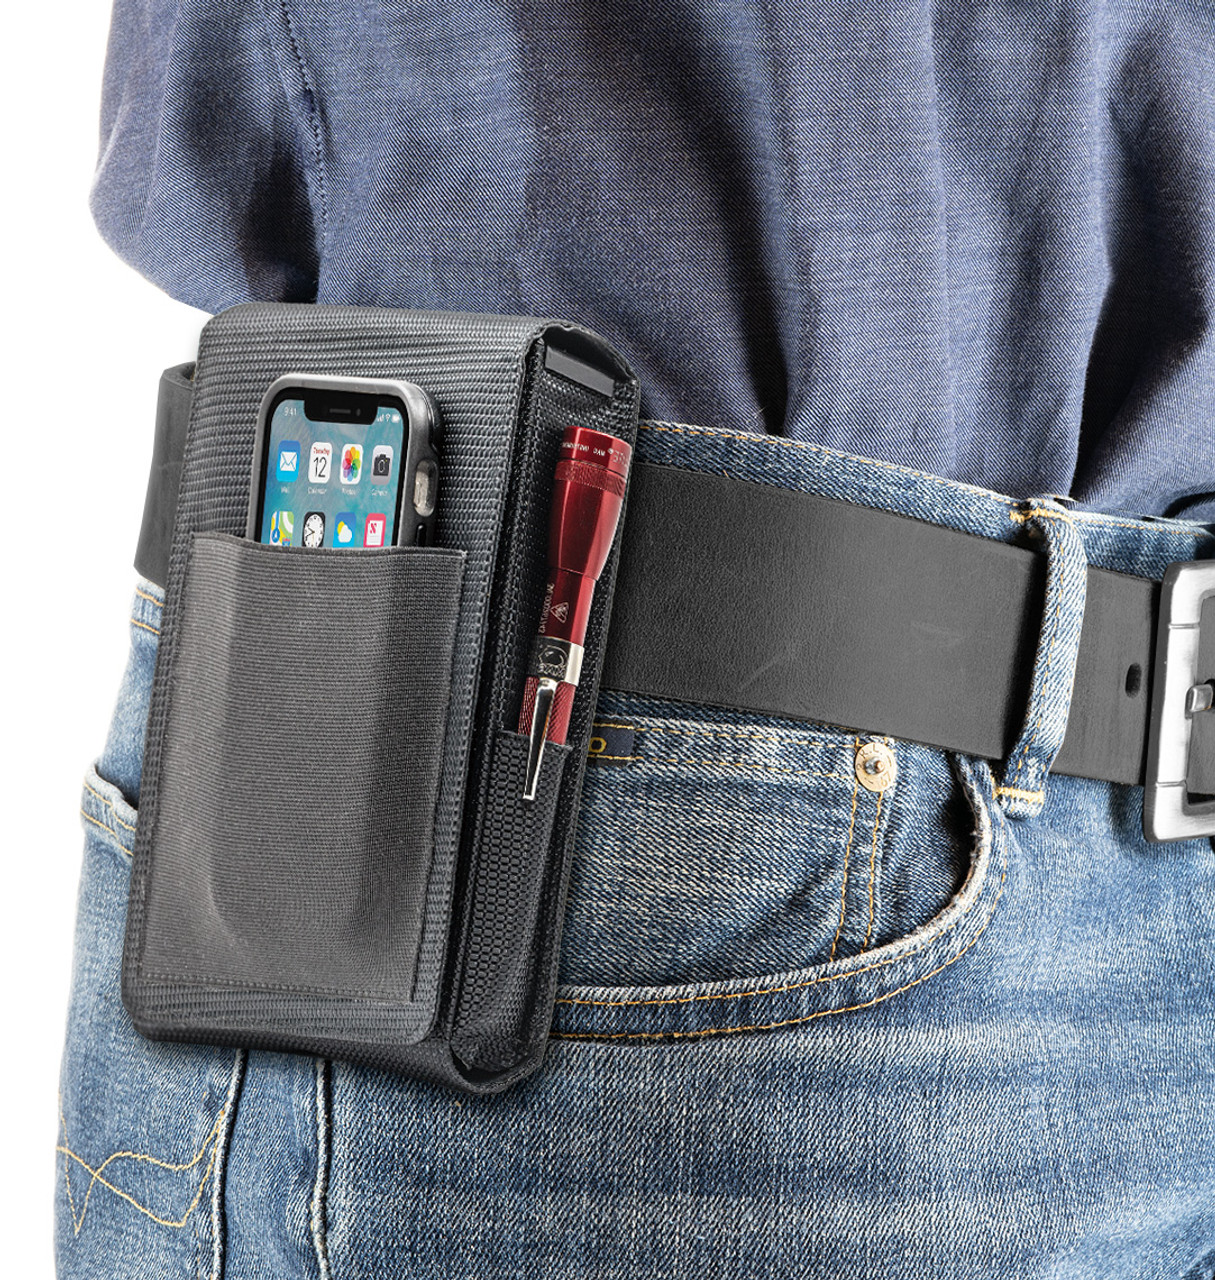 The Springfield Hellcat Perfect Holster